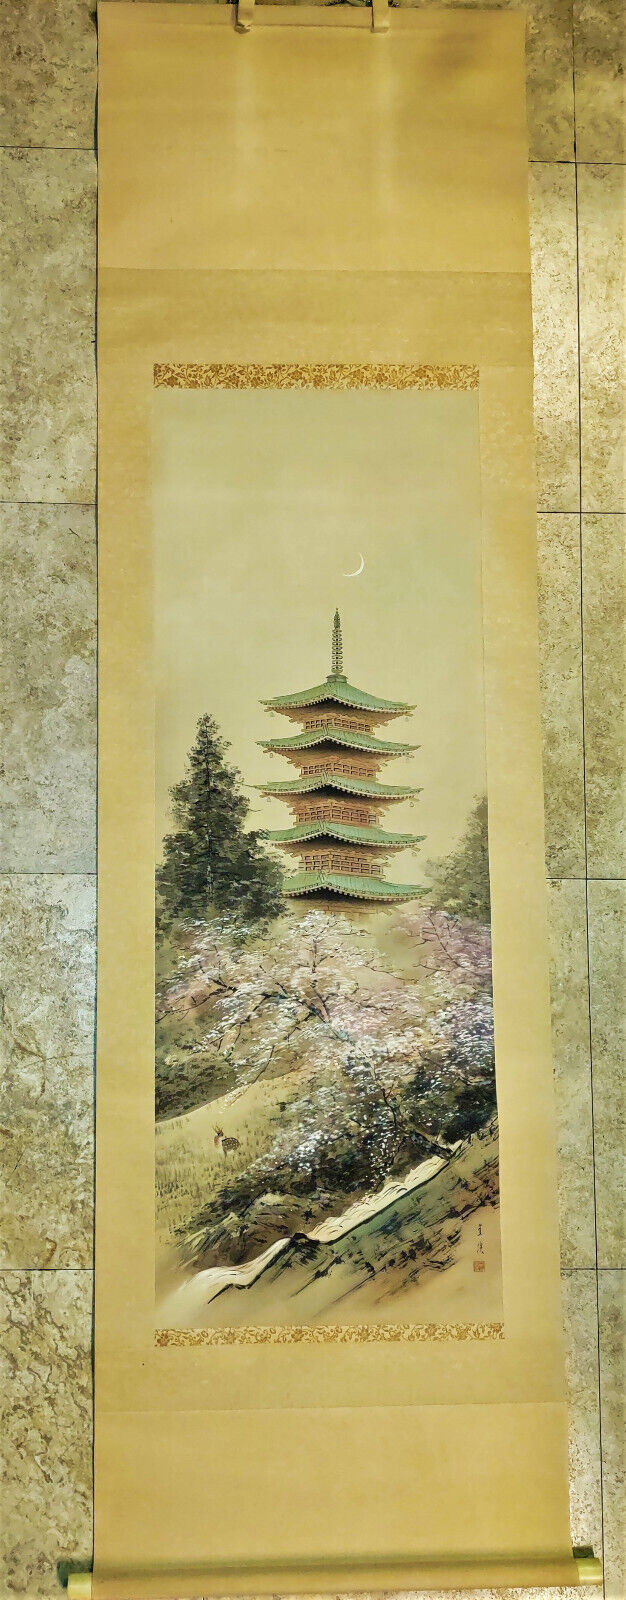 Old Chinese Vertical Scroll Painting Stream, Blooming Cherry Tree, Deer & Pagoda